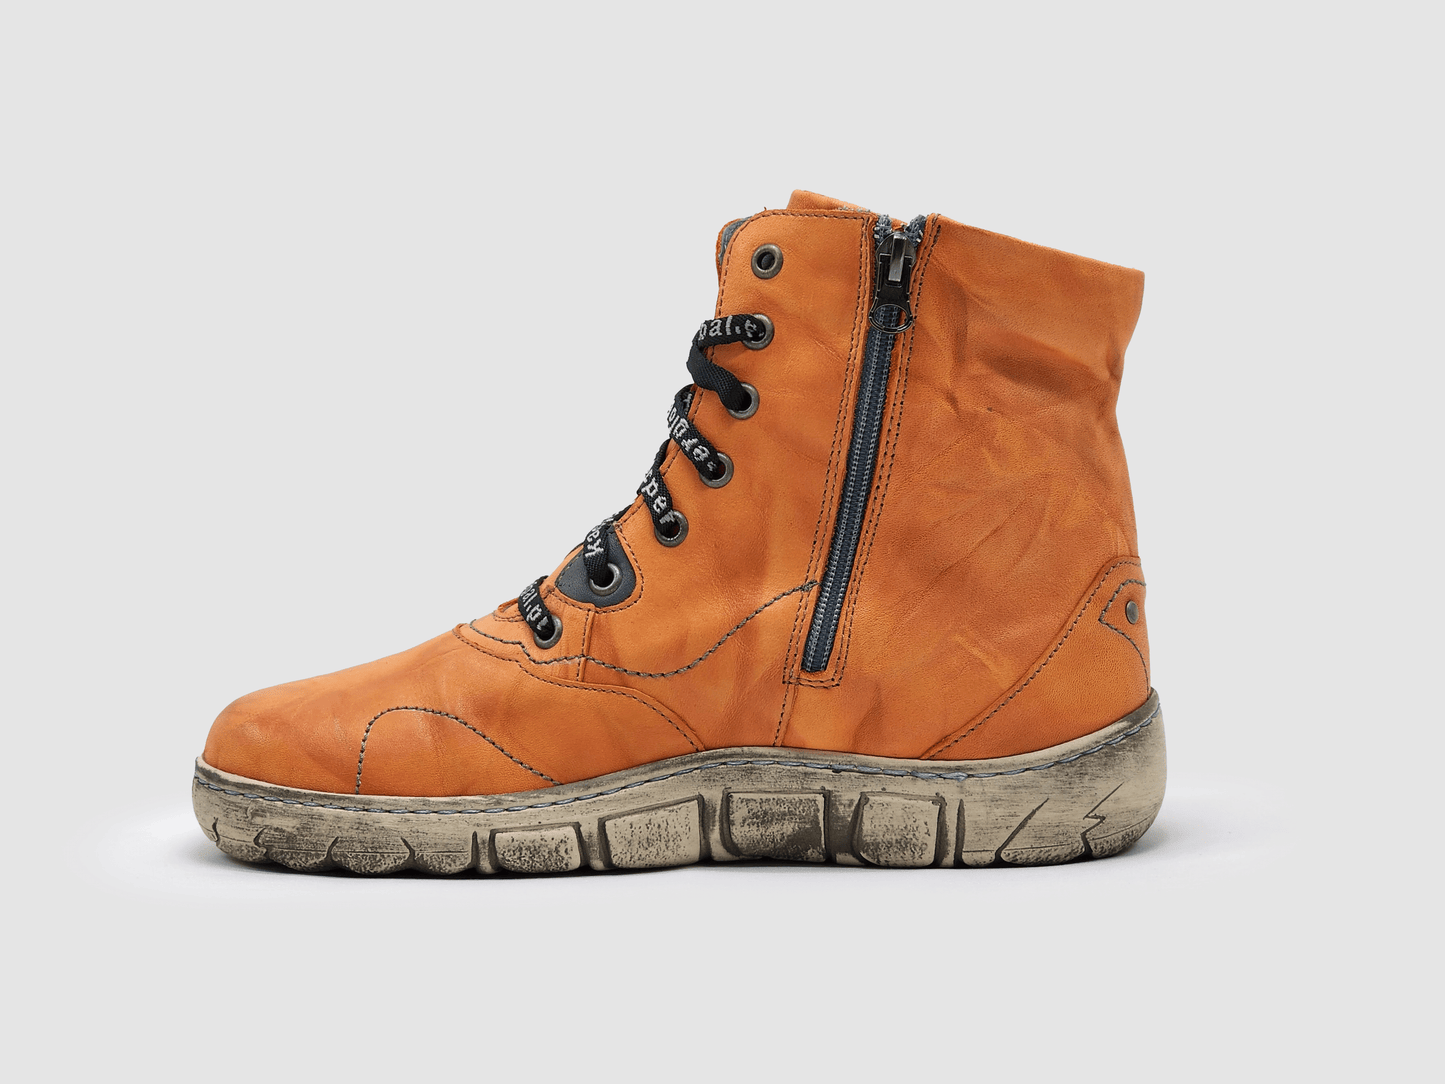 Women's Original Thick Wool-Lined Zip-Up Leather Boots - Orange - Kacper Global Shoes 